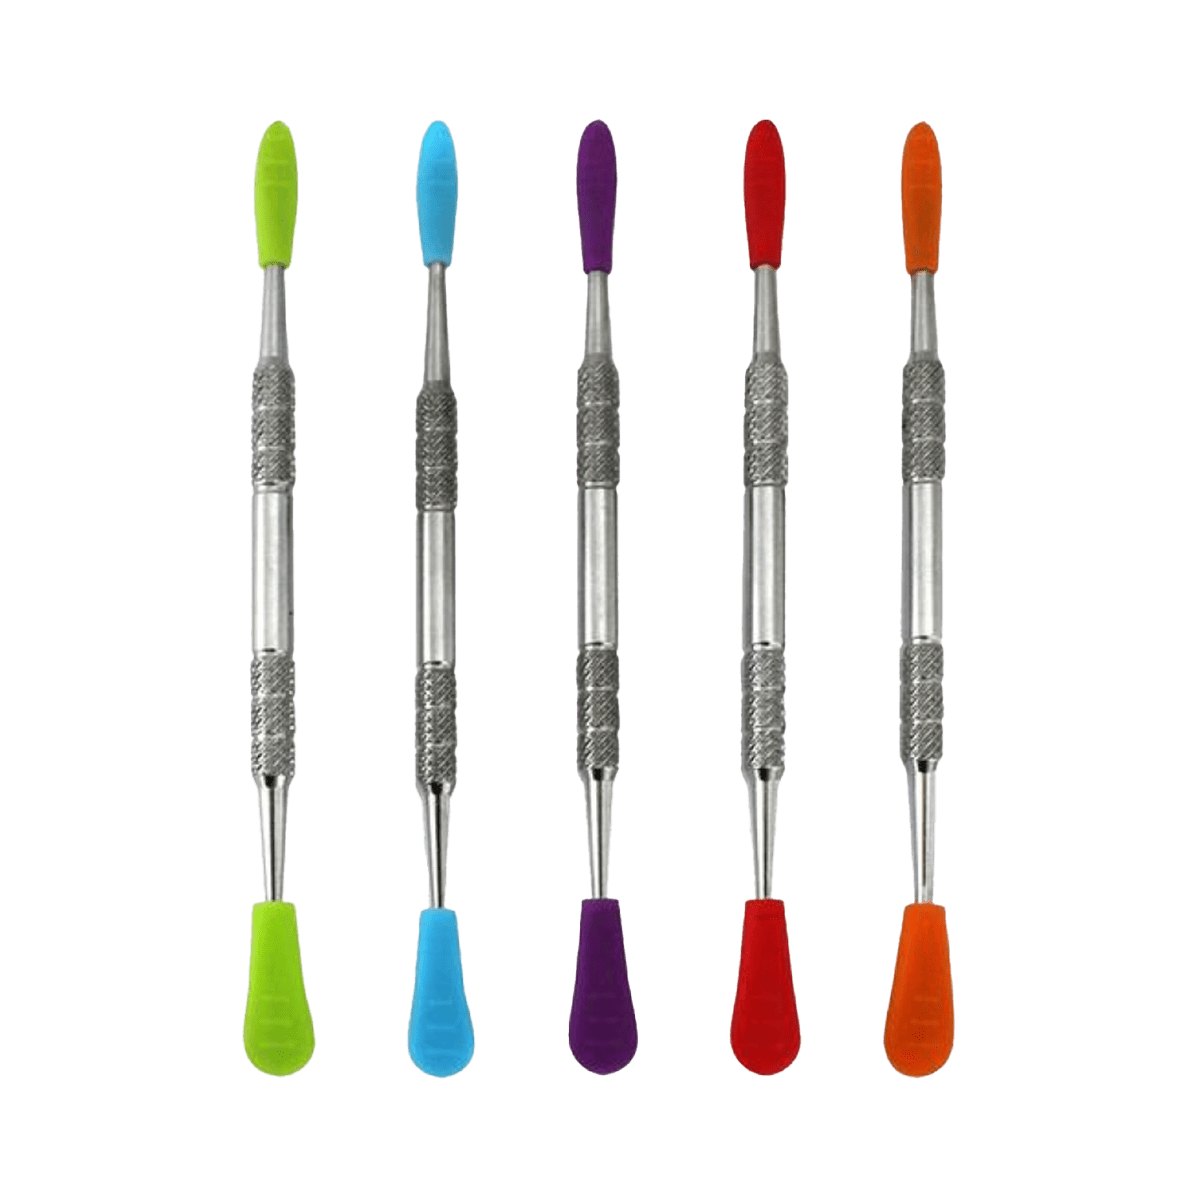 Dabbers Metal Dab Tool With Silicone Sleeves – Assorted Colors